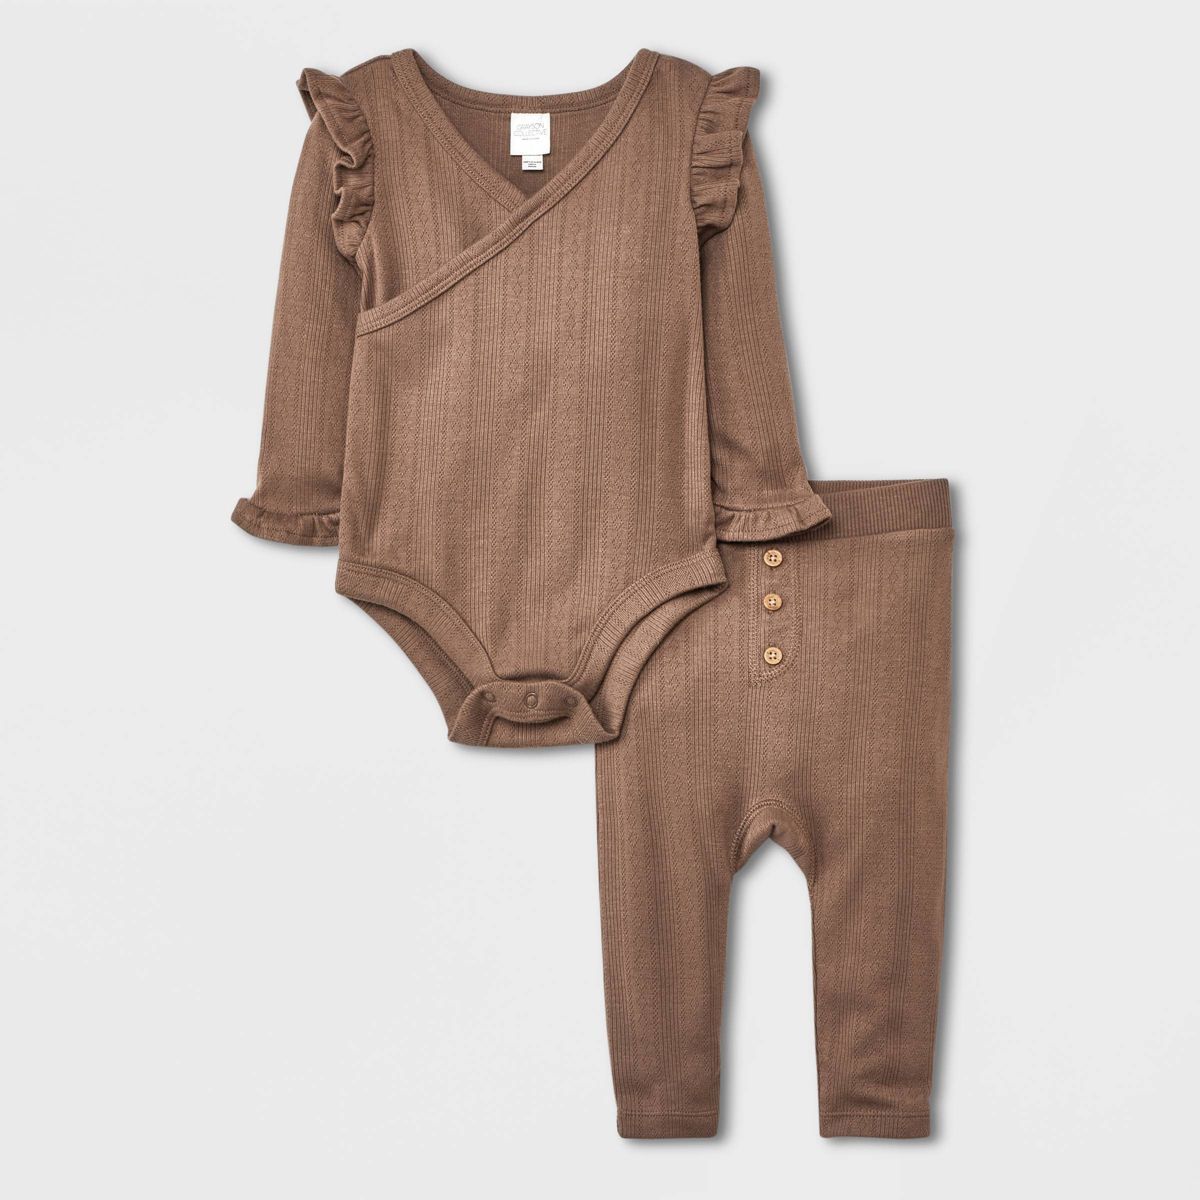 Grayson Collective Baby Girls' 2pc Solid Top & Bottom Set - Brown | Target